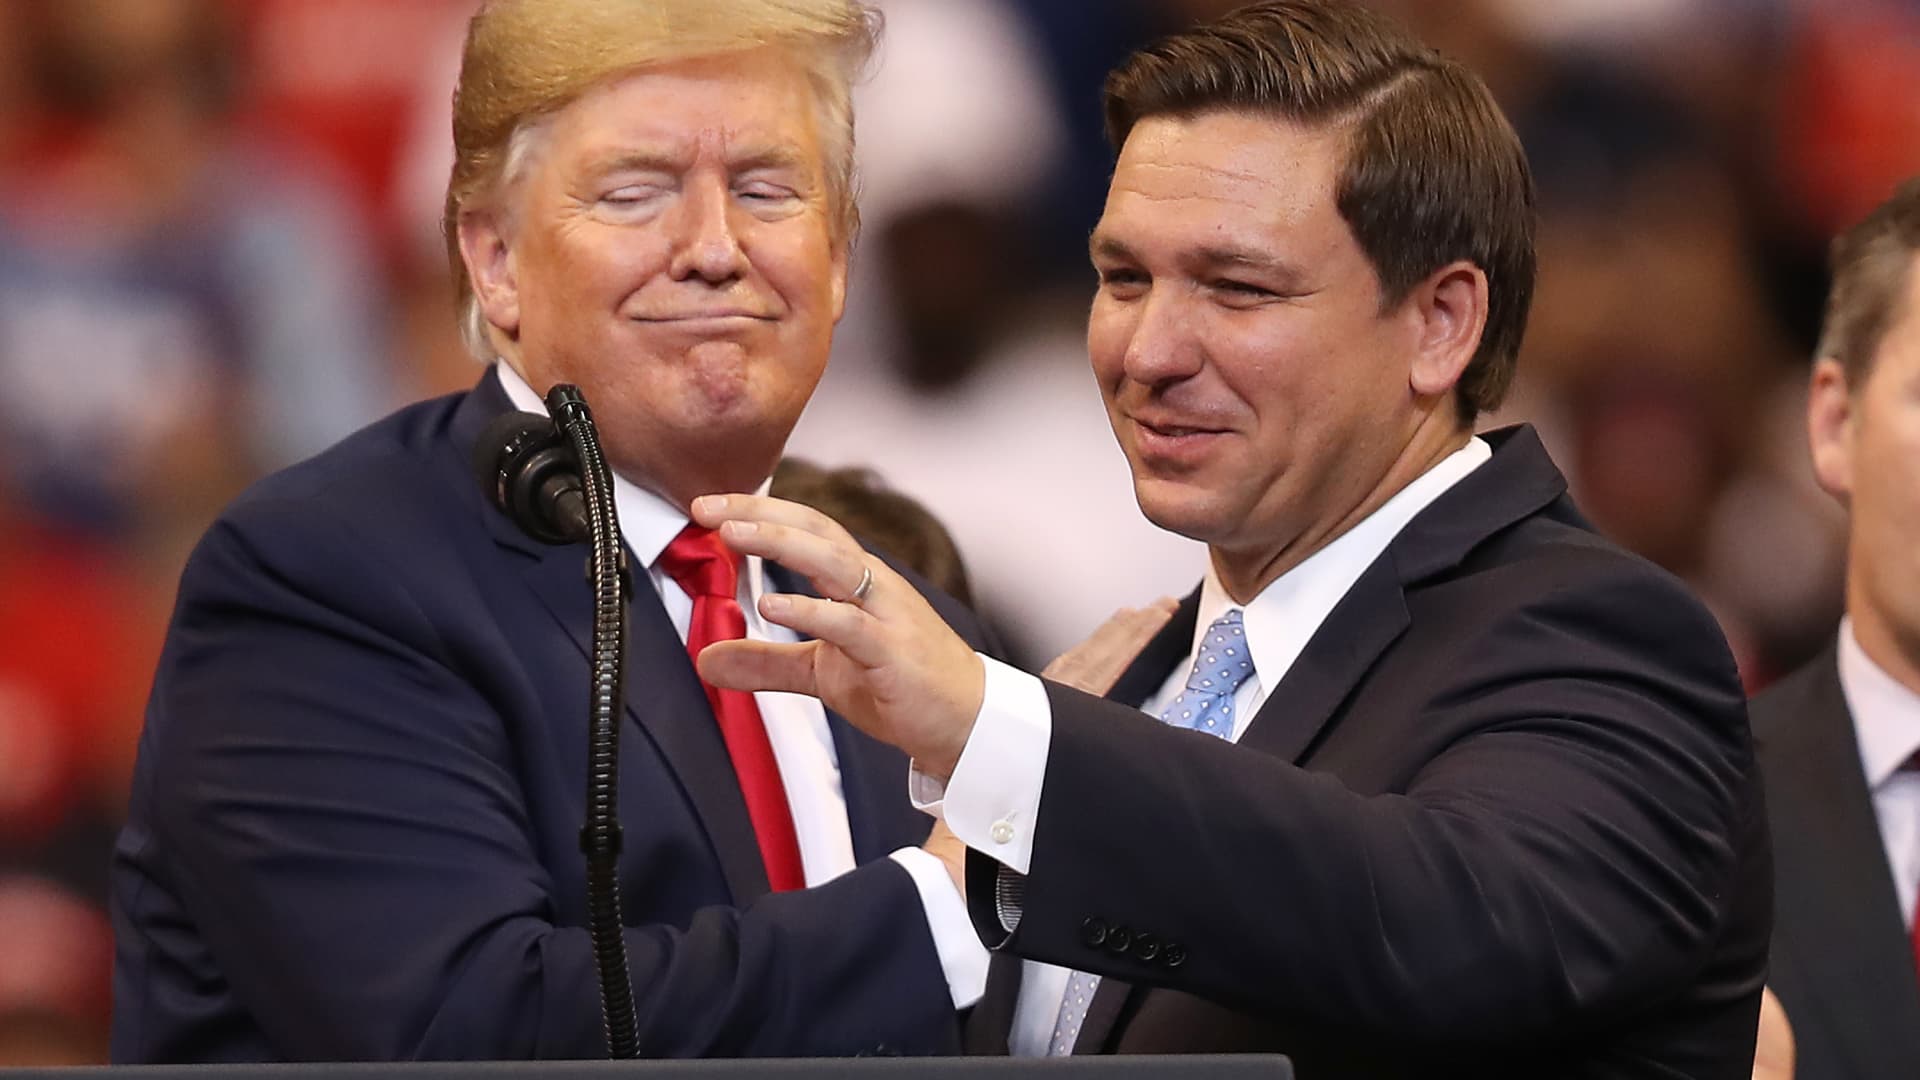 U.S. President Donald Trump introduces Florida Governor Ron DeSantis during a homecoming campaign rally at the BB&T Center on November 26, 2019 in Sunrise, Florida. President Trump continues to campaign for re-election in the 2020 presidential race. 